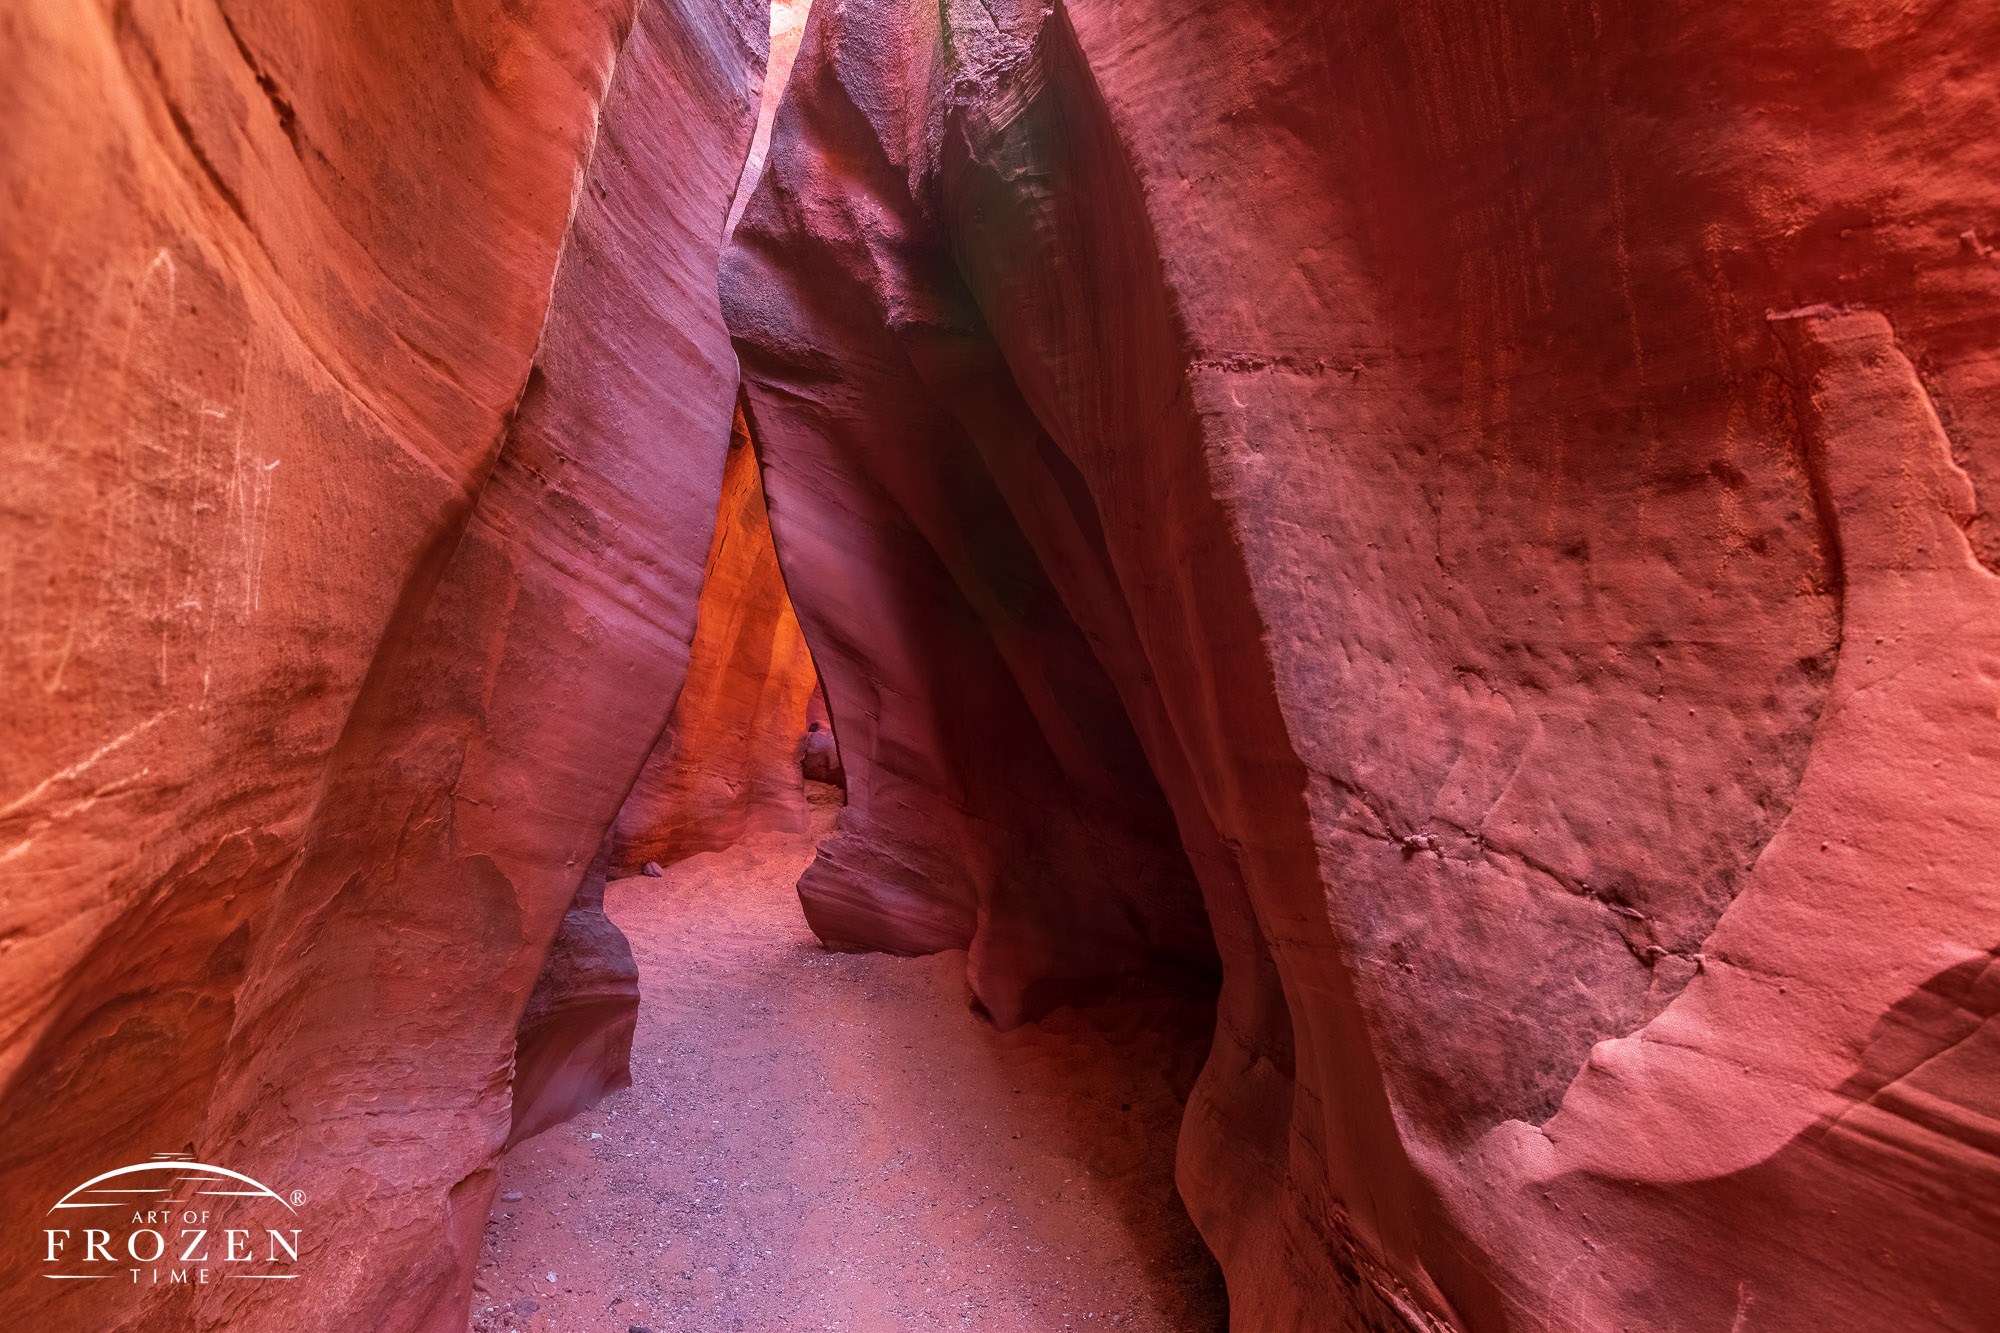 Spooky Slot Canyon whose intricate erosional feature serve as a visual delight of light and shadows